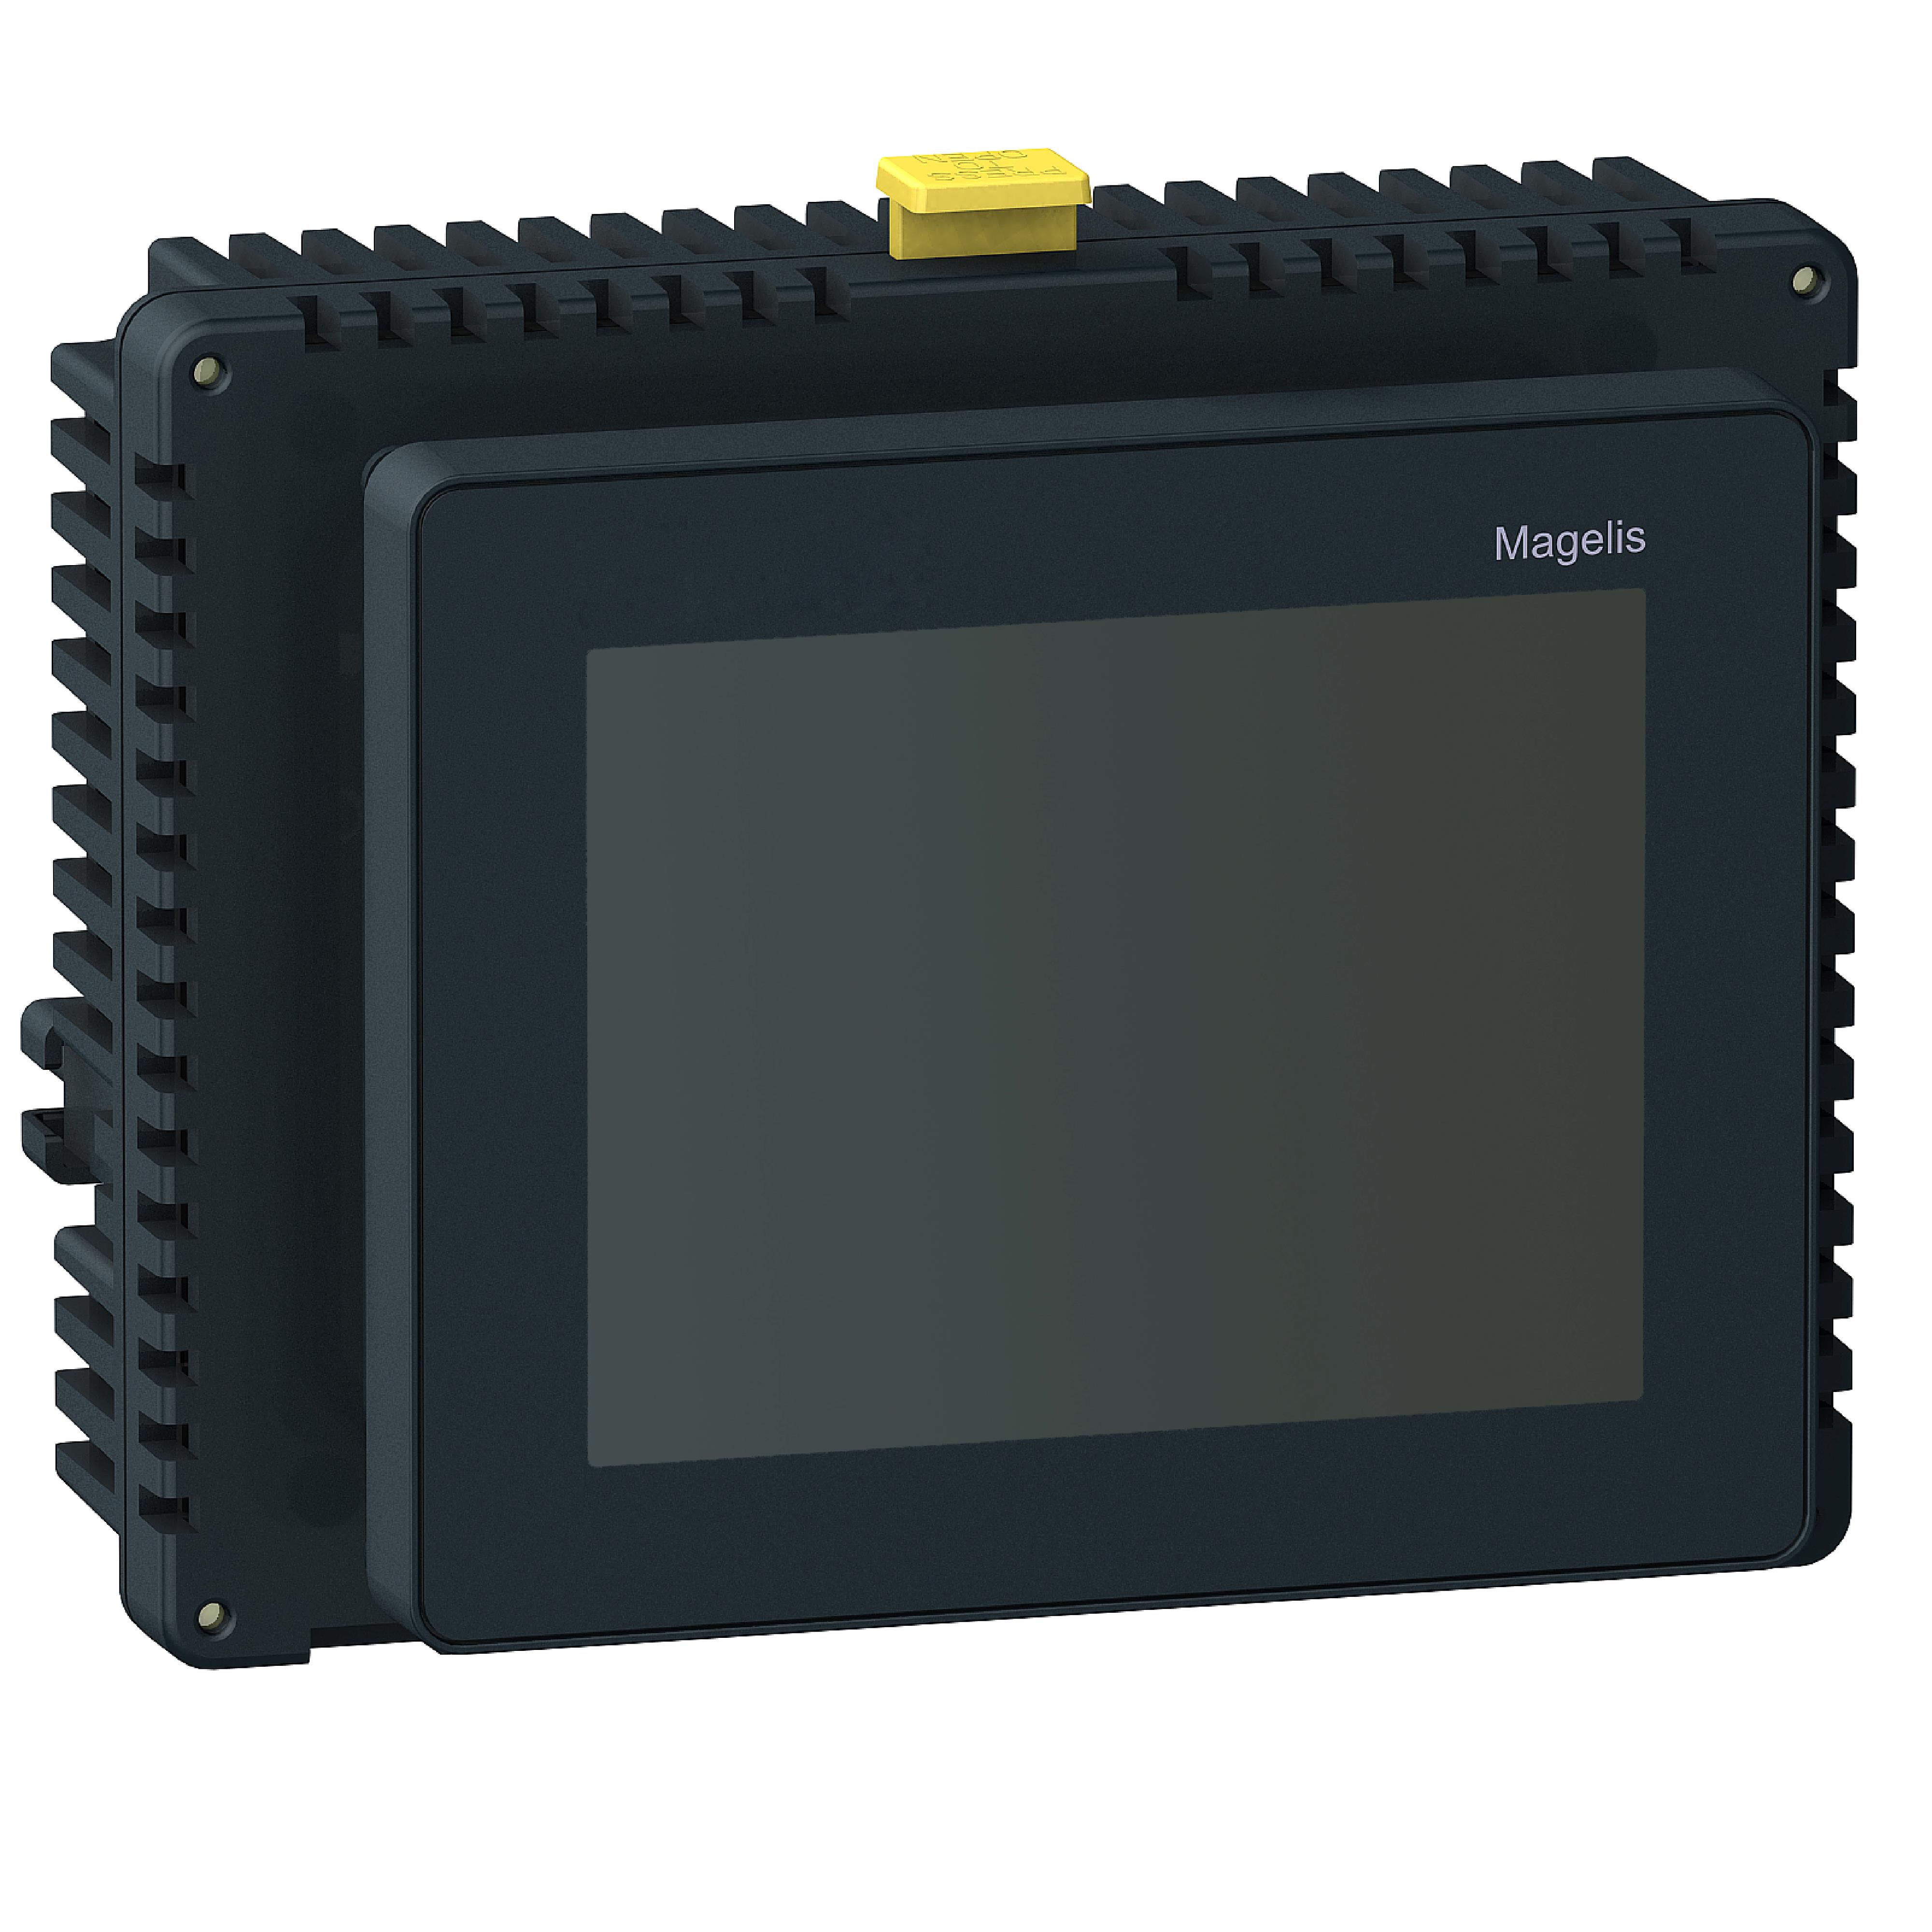 【HMISTU855S】5.7" TOUCH SCREEN WITH SOFTWARE